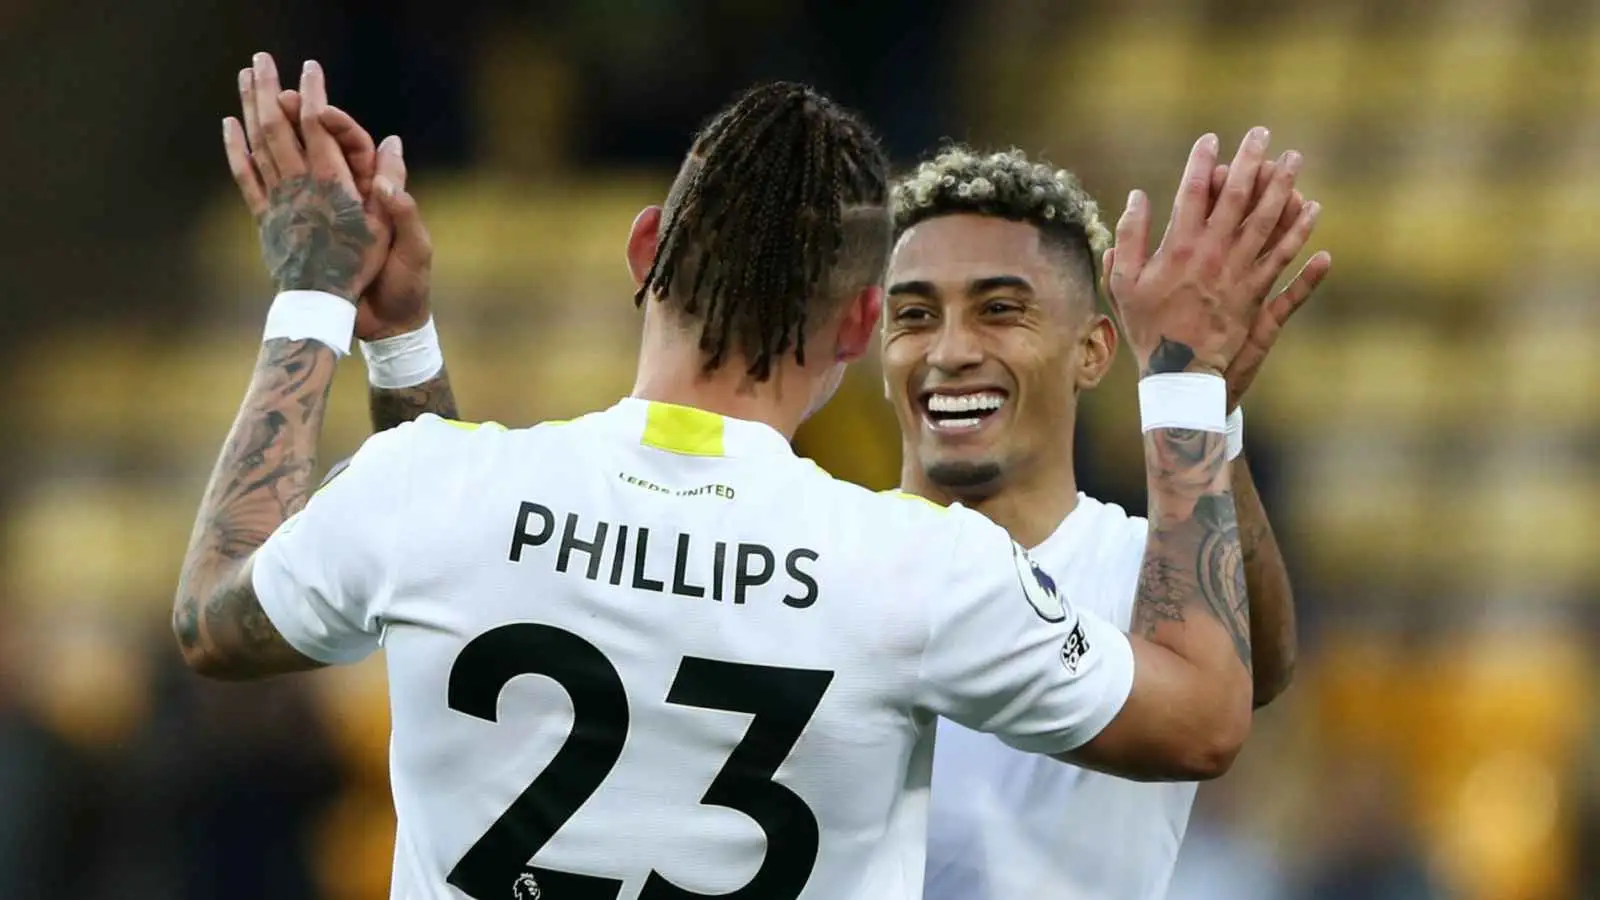 Kalvin Phillips and Raphinha celebrate together